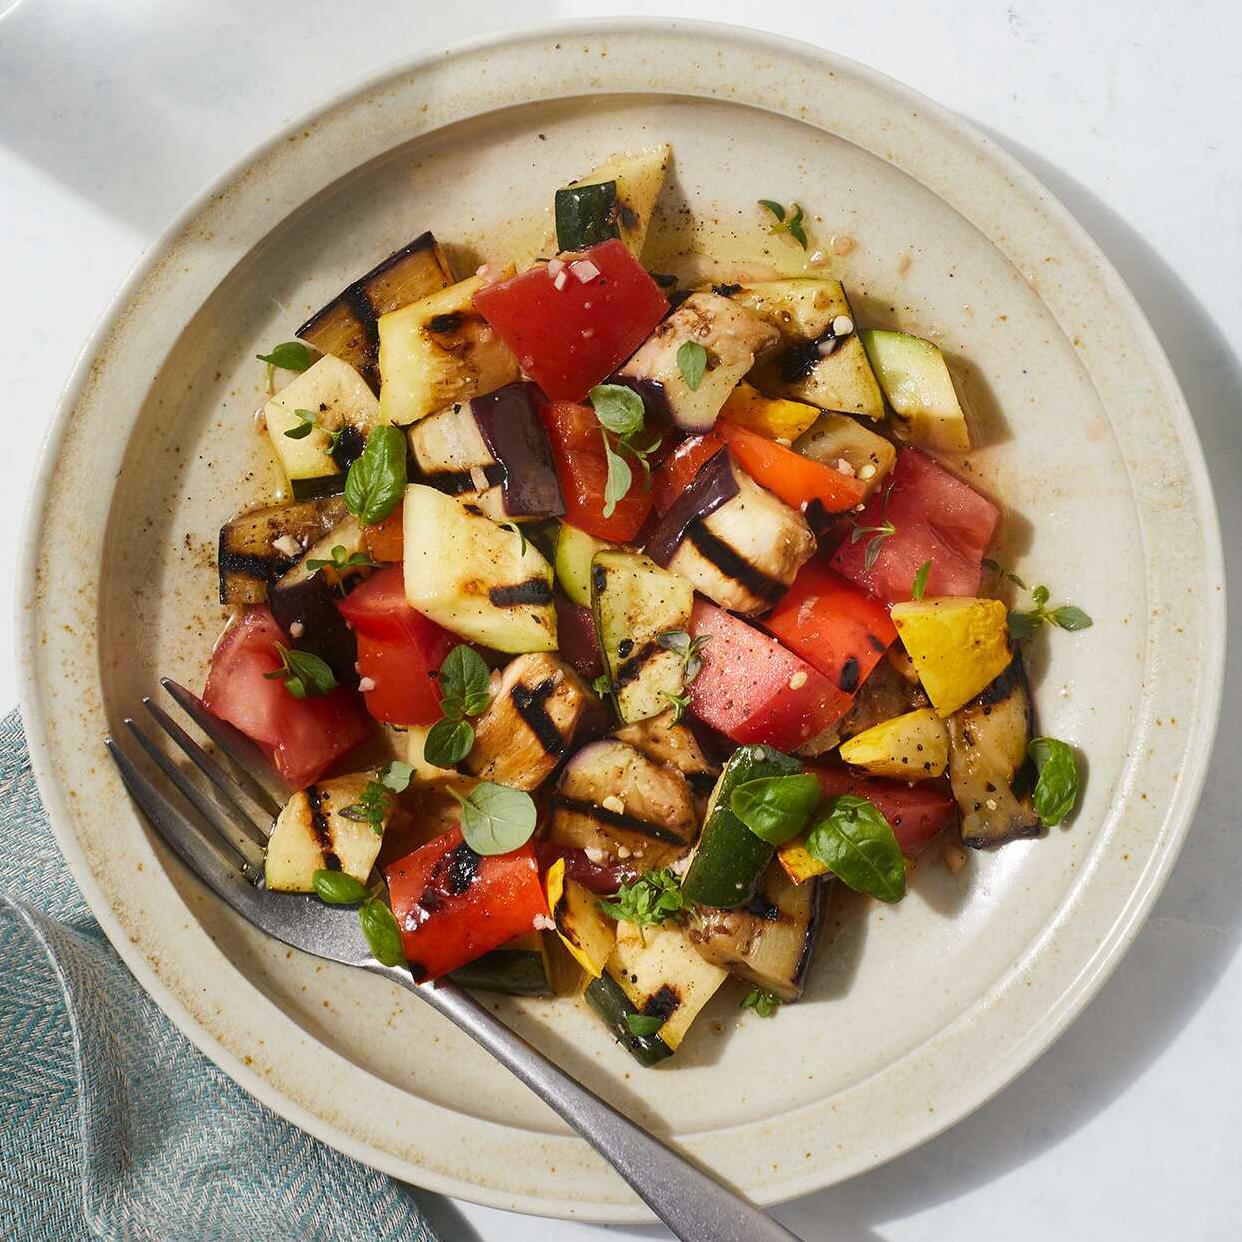  Grilled ratatouille: A colorful and flavorful medley of summer vegetables!